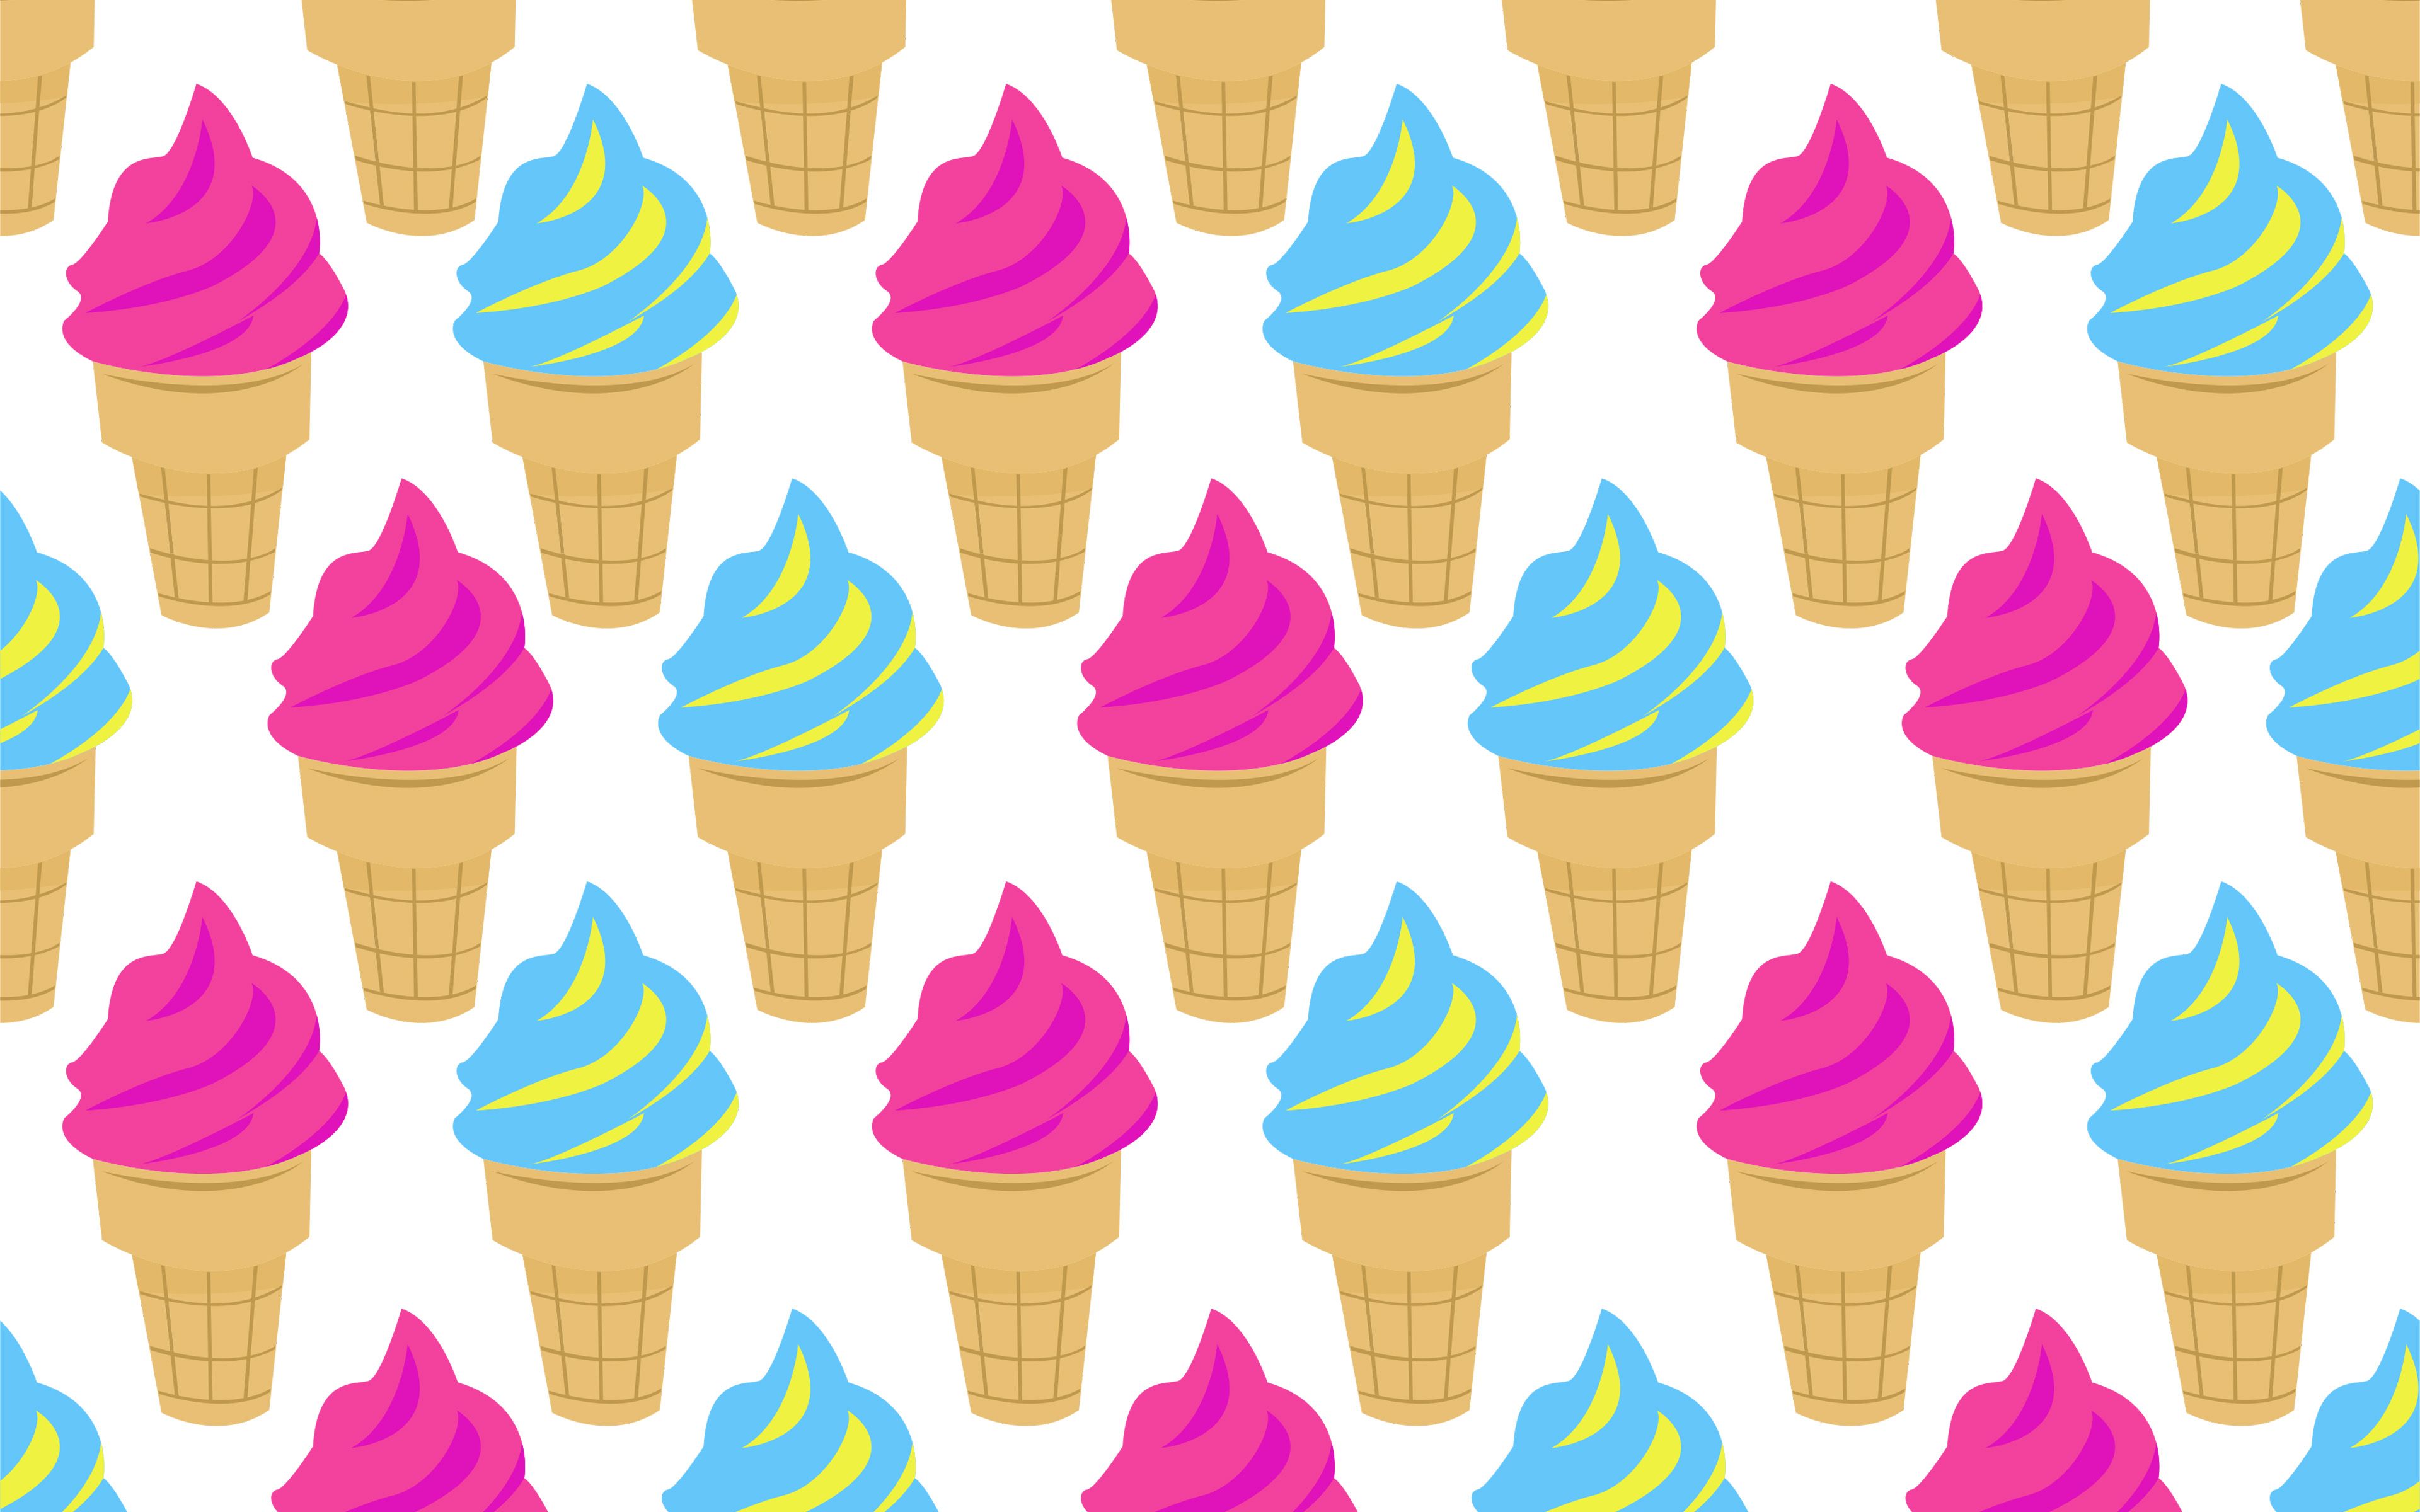 Download wallpaper ice cream pattern, 4k, food textures, background with ice cream, vector textures, food patterns for desktop with resolution 3840x2400. High Quality HD picture wallpaper